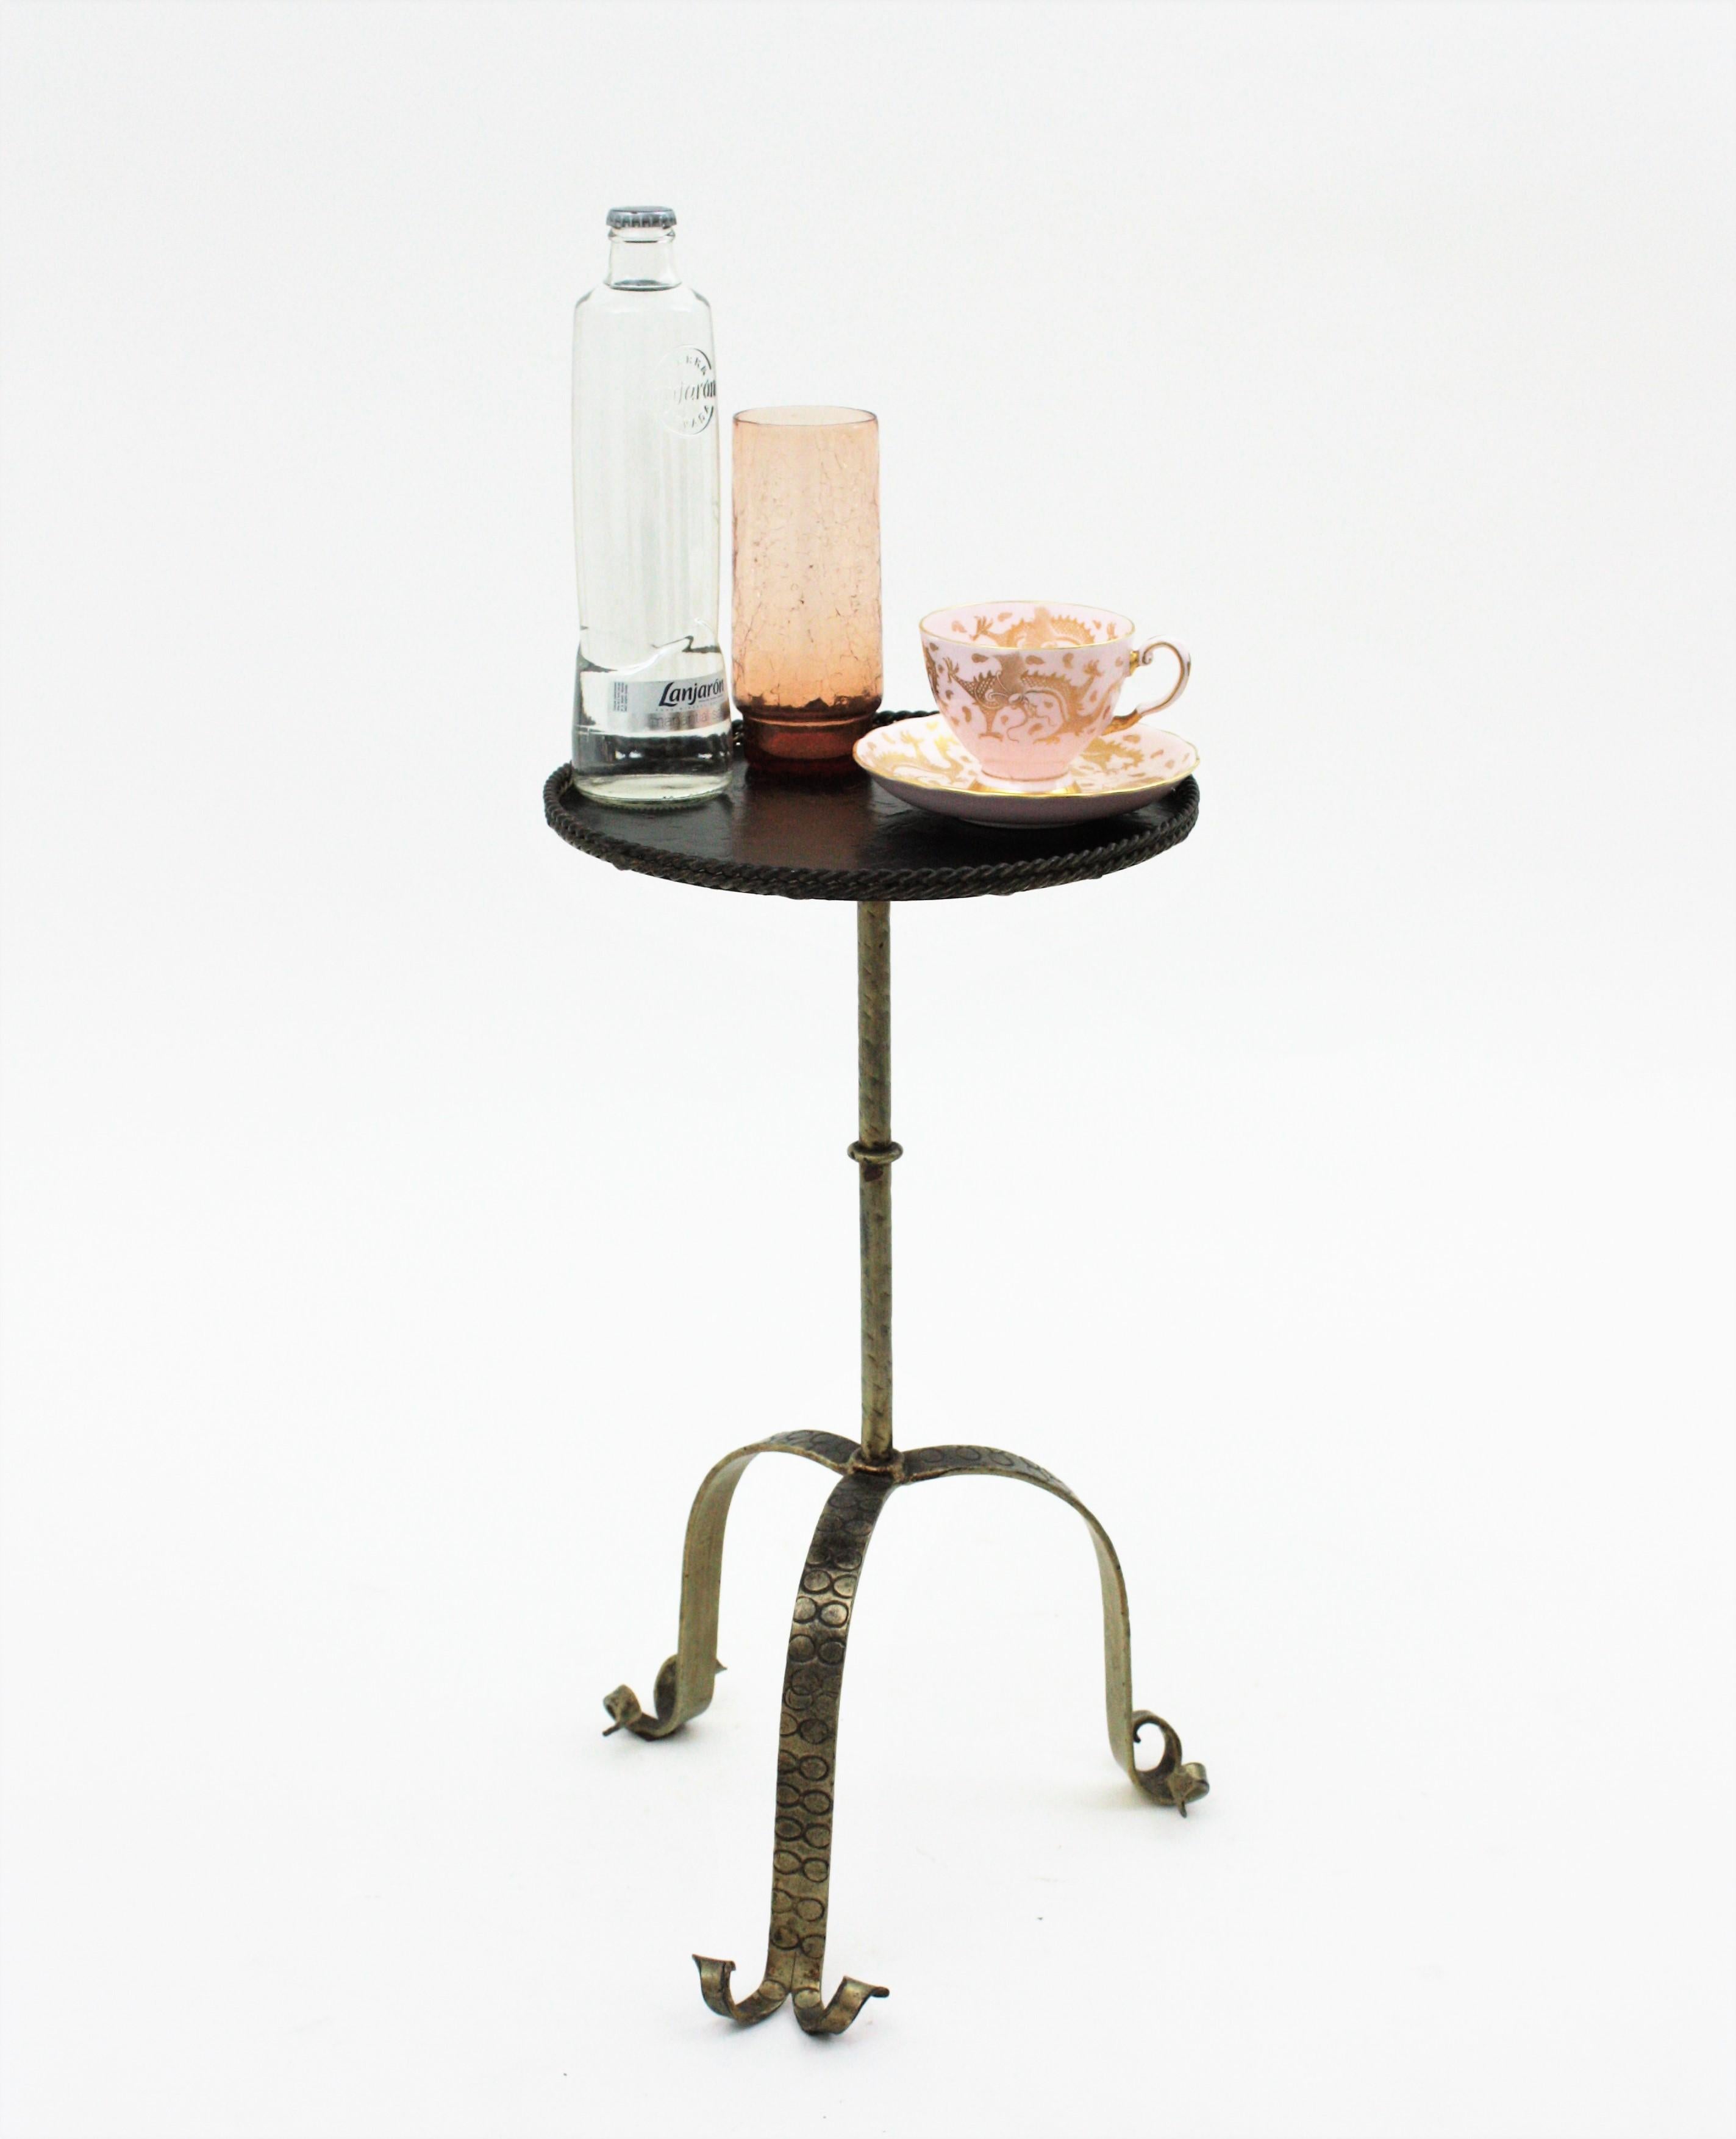 Hand forged iron Martini table, stand or drinks table, Spain, 1960s.
This nice end table has a black patinated top with an iron braided rope surrounding the edge. It stands on a gilt iron tripod base with scroll ended feet and hammered details